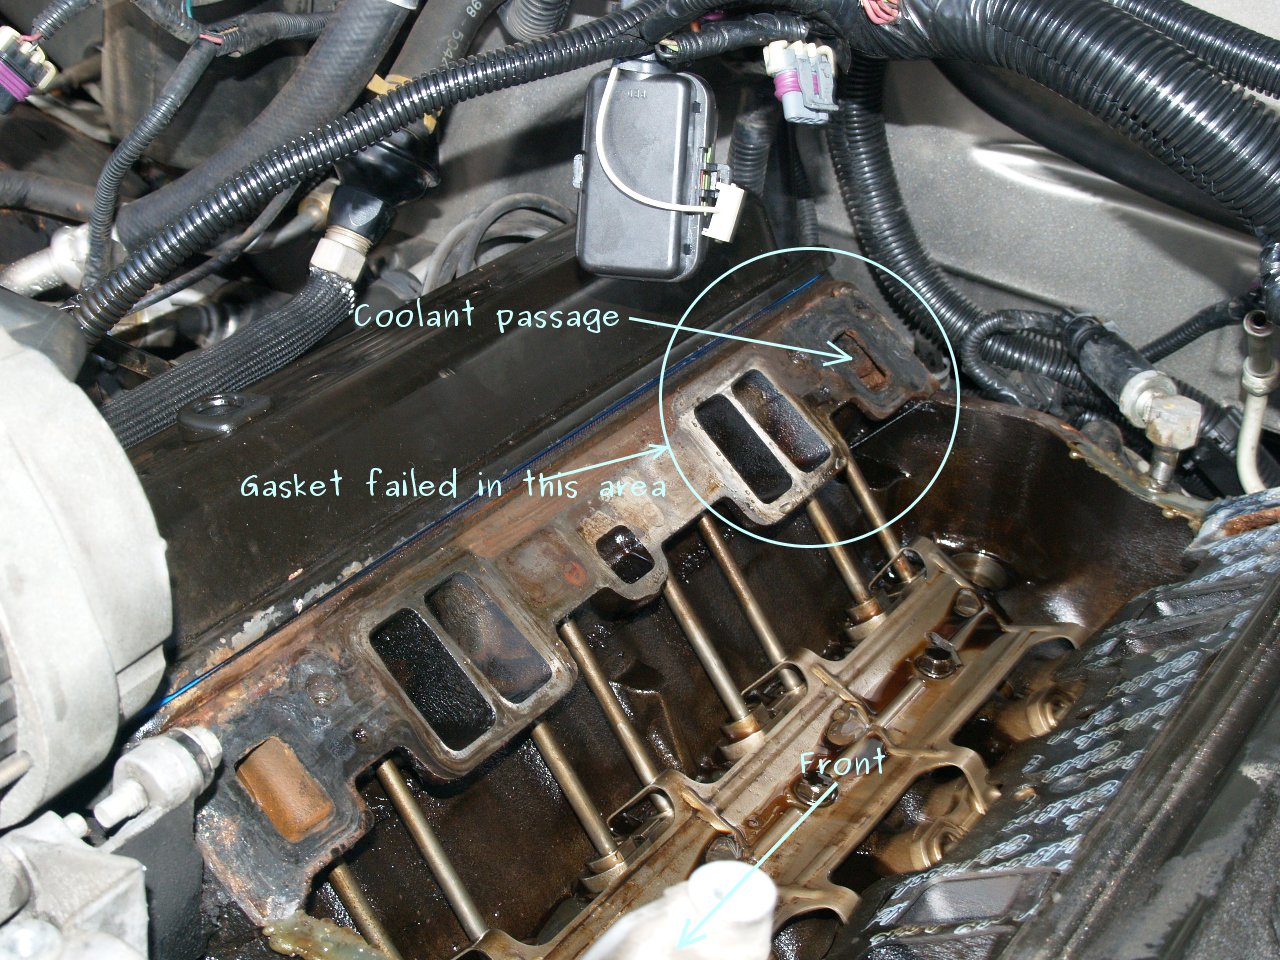 See P232E in engine